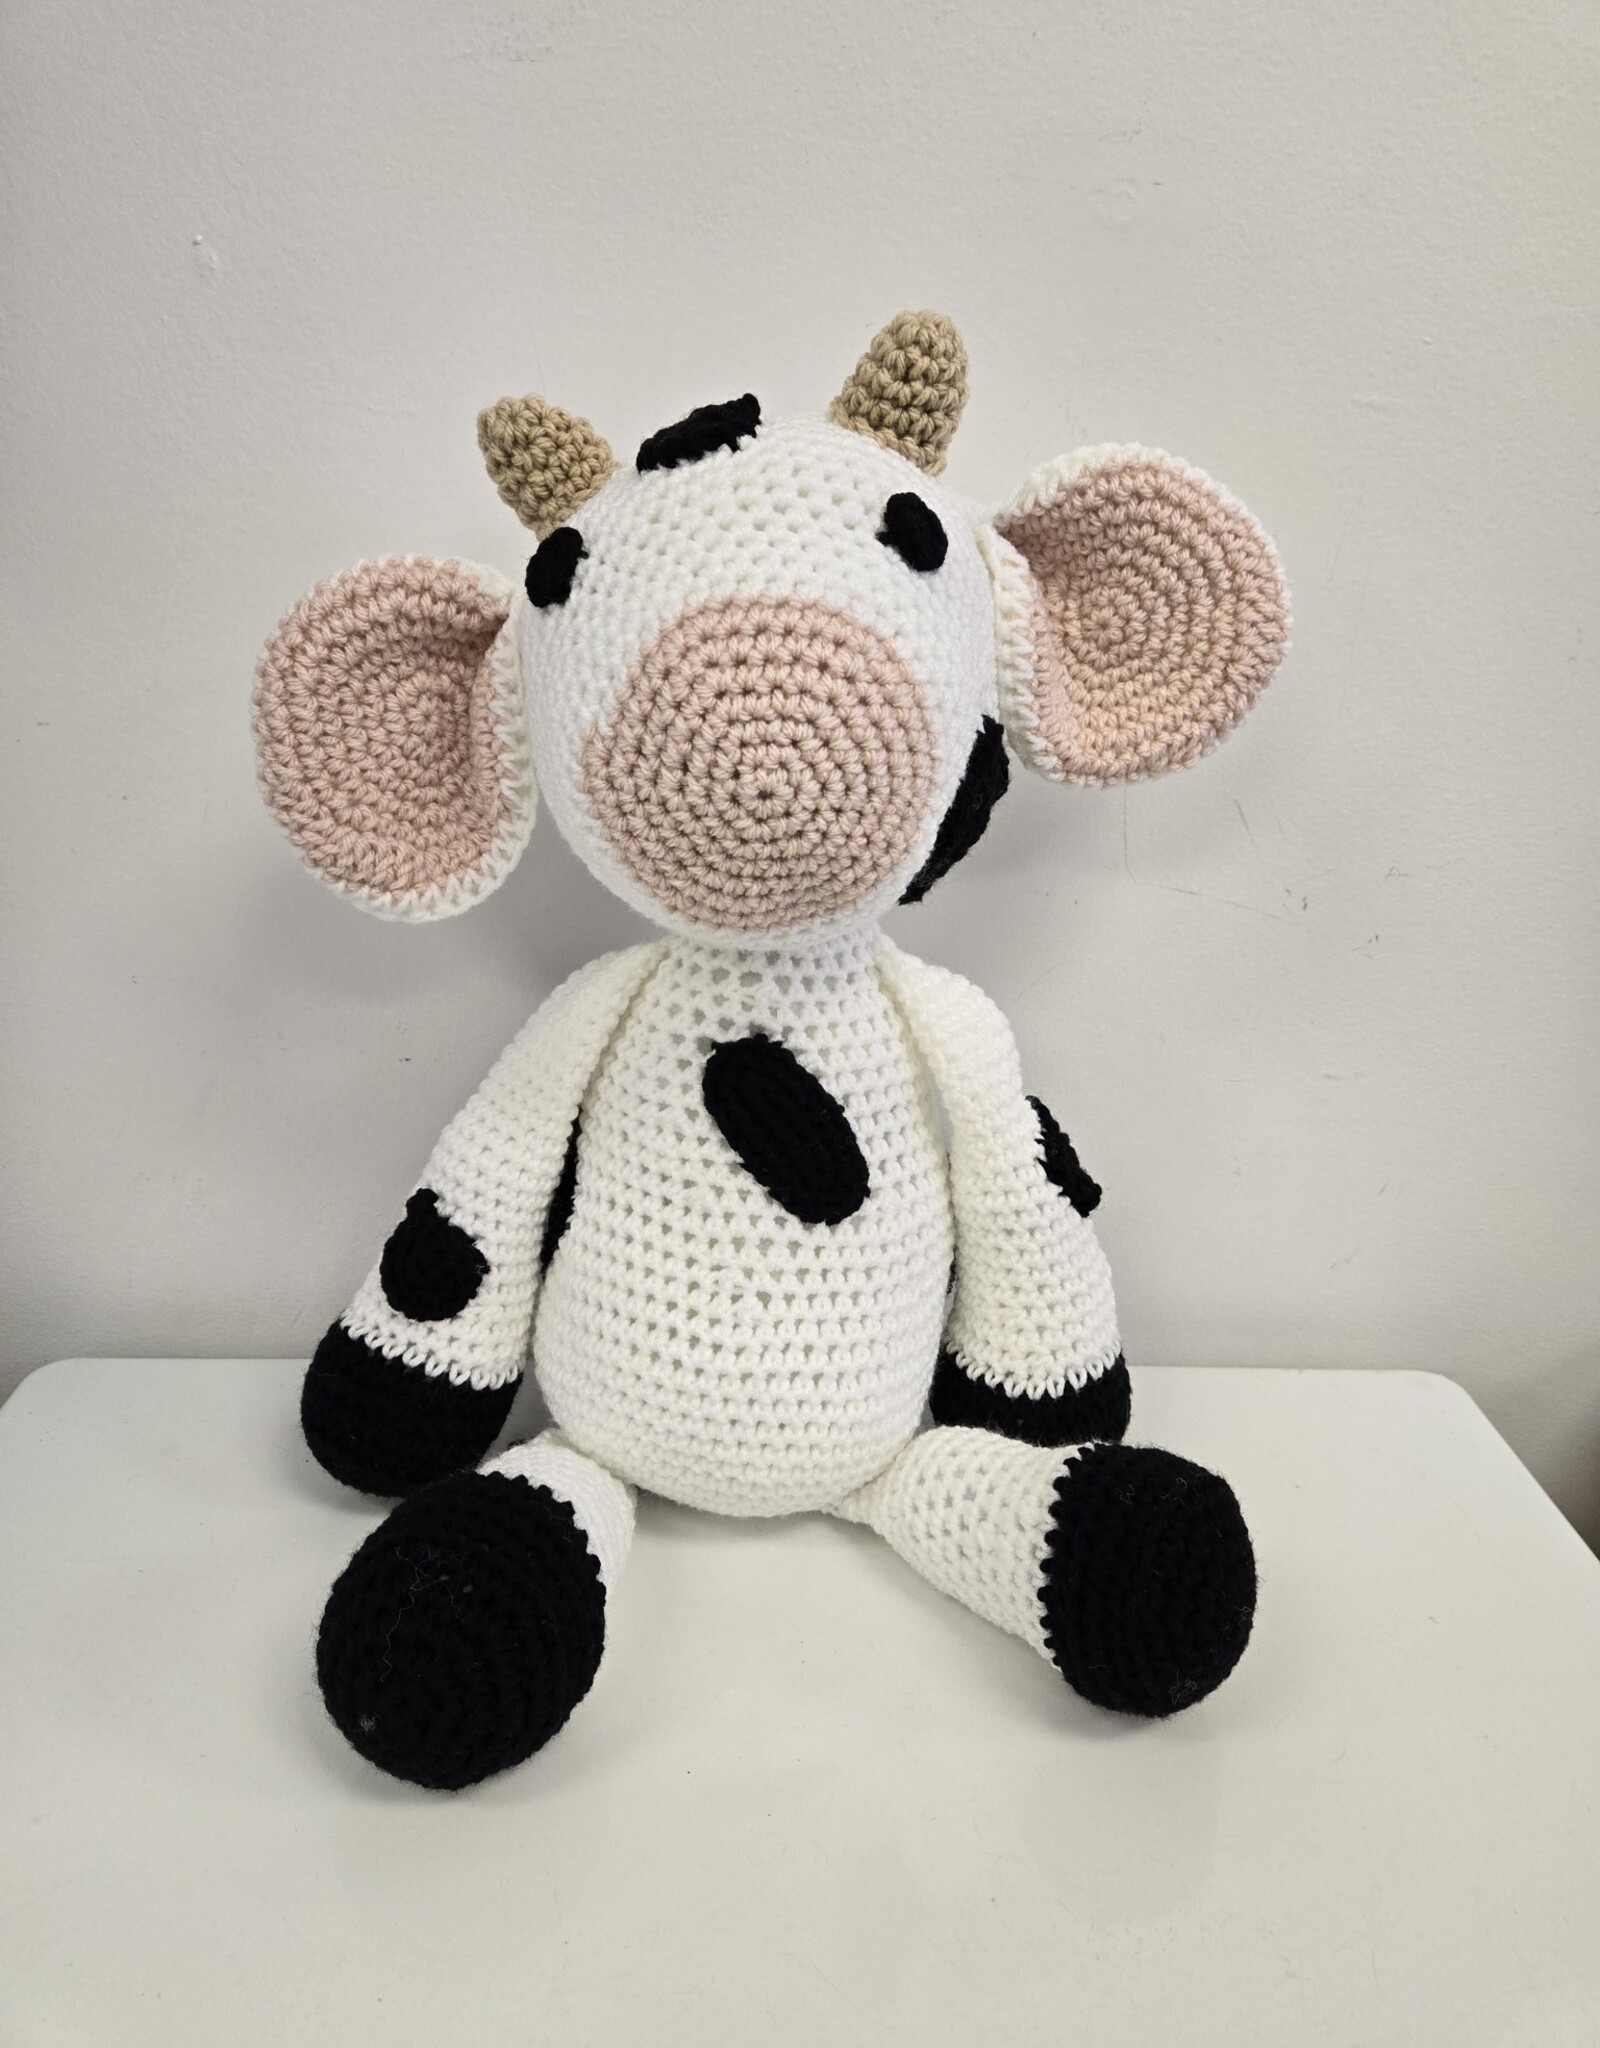 Crocheted Large Stuffie - Cow